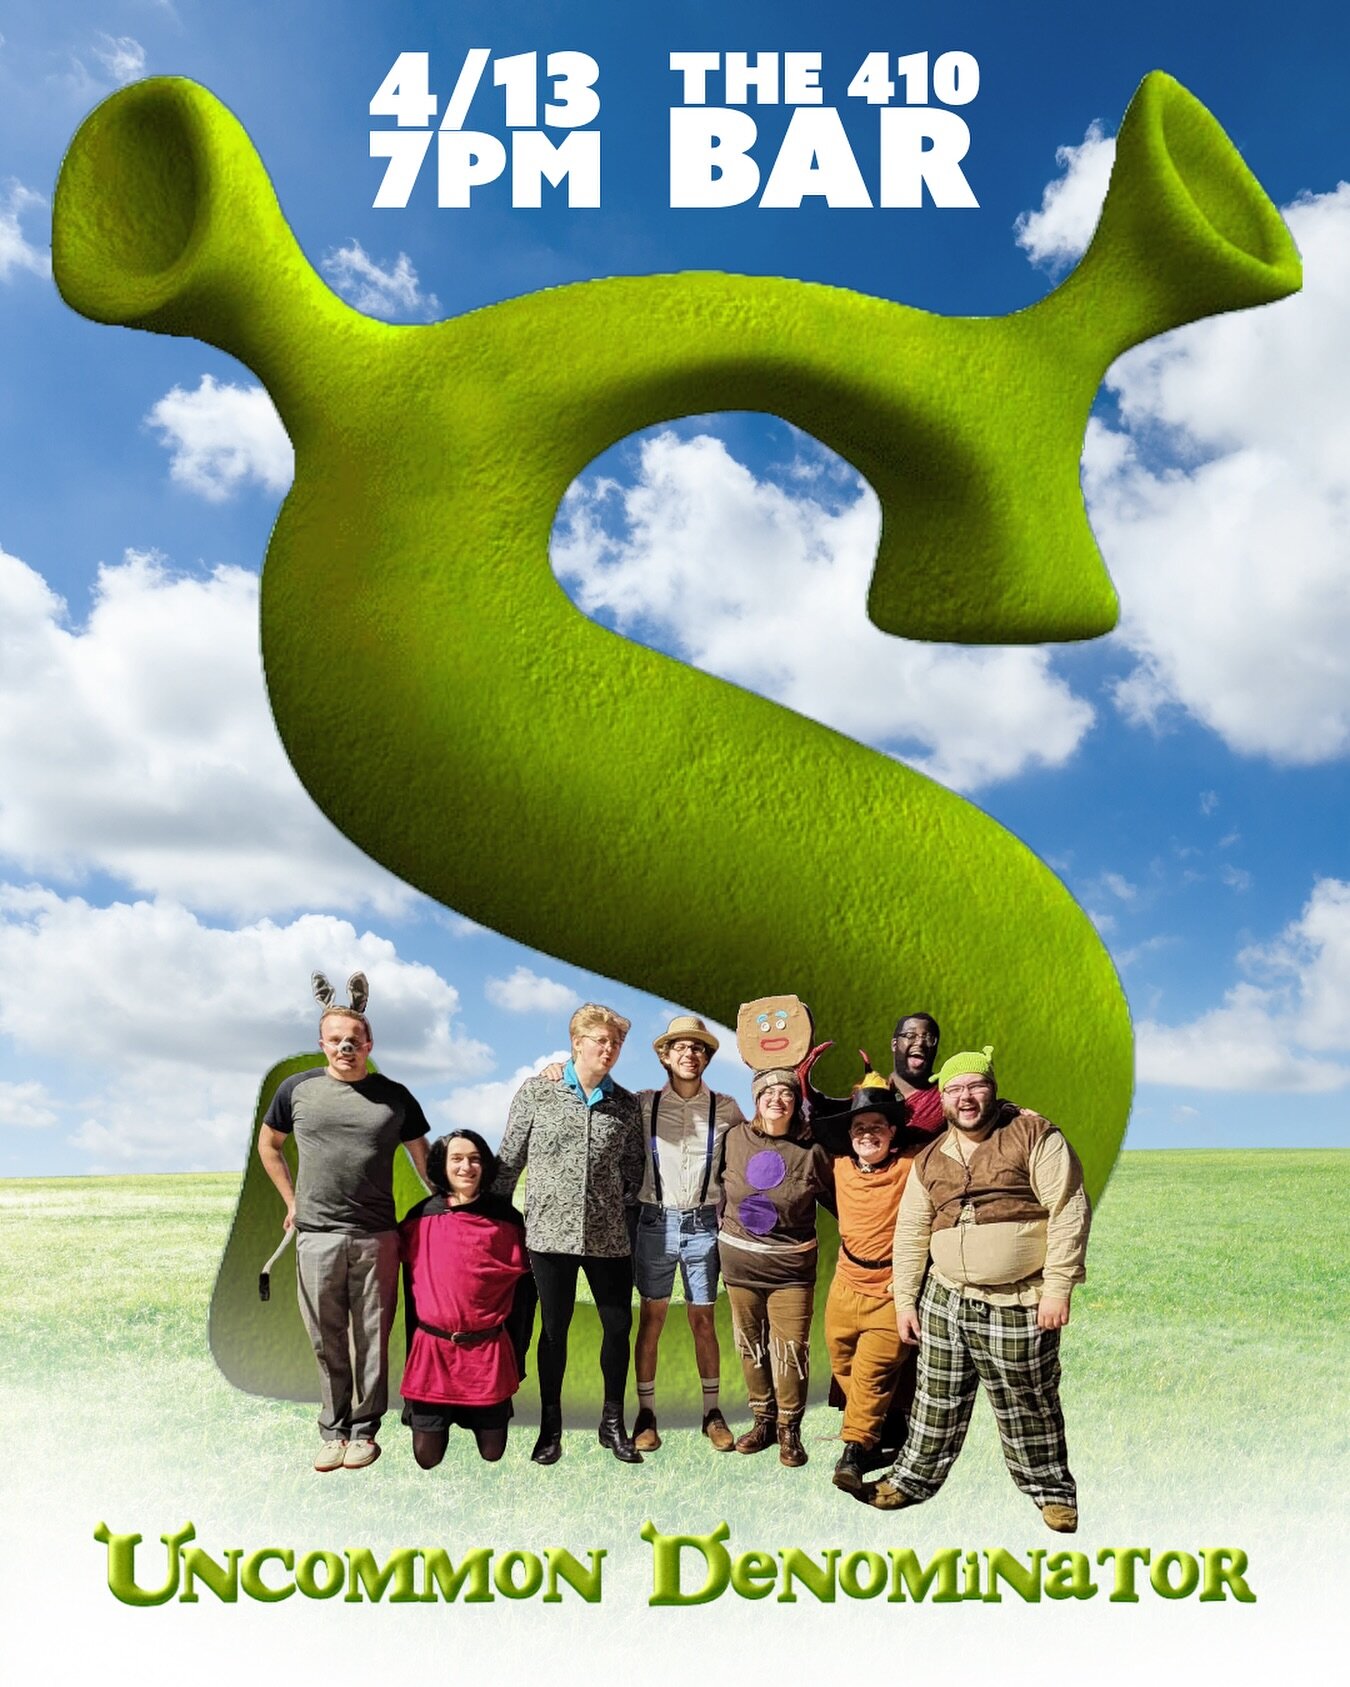 Have the recent Shrek event cancellations been bringing you down? DON&rsquo;T FRET! Get ready to ogre-load on fun with us on Saturday April 13th at 7pm! 
Bringing the Shrek soundtrack to life at The 410 Bar (410 Galloway St. Eau Claire, WI), we were 